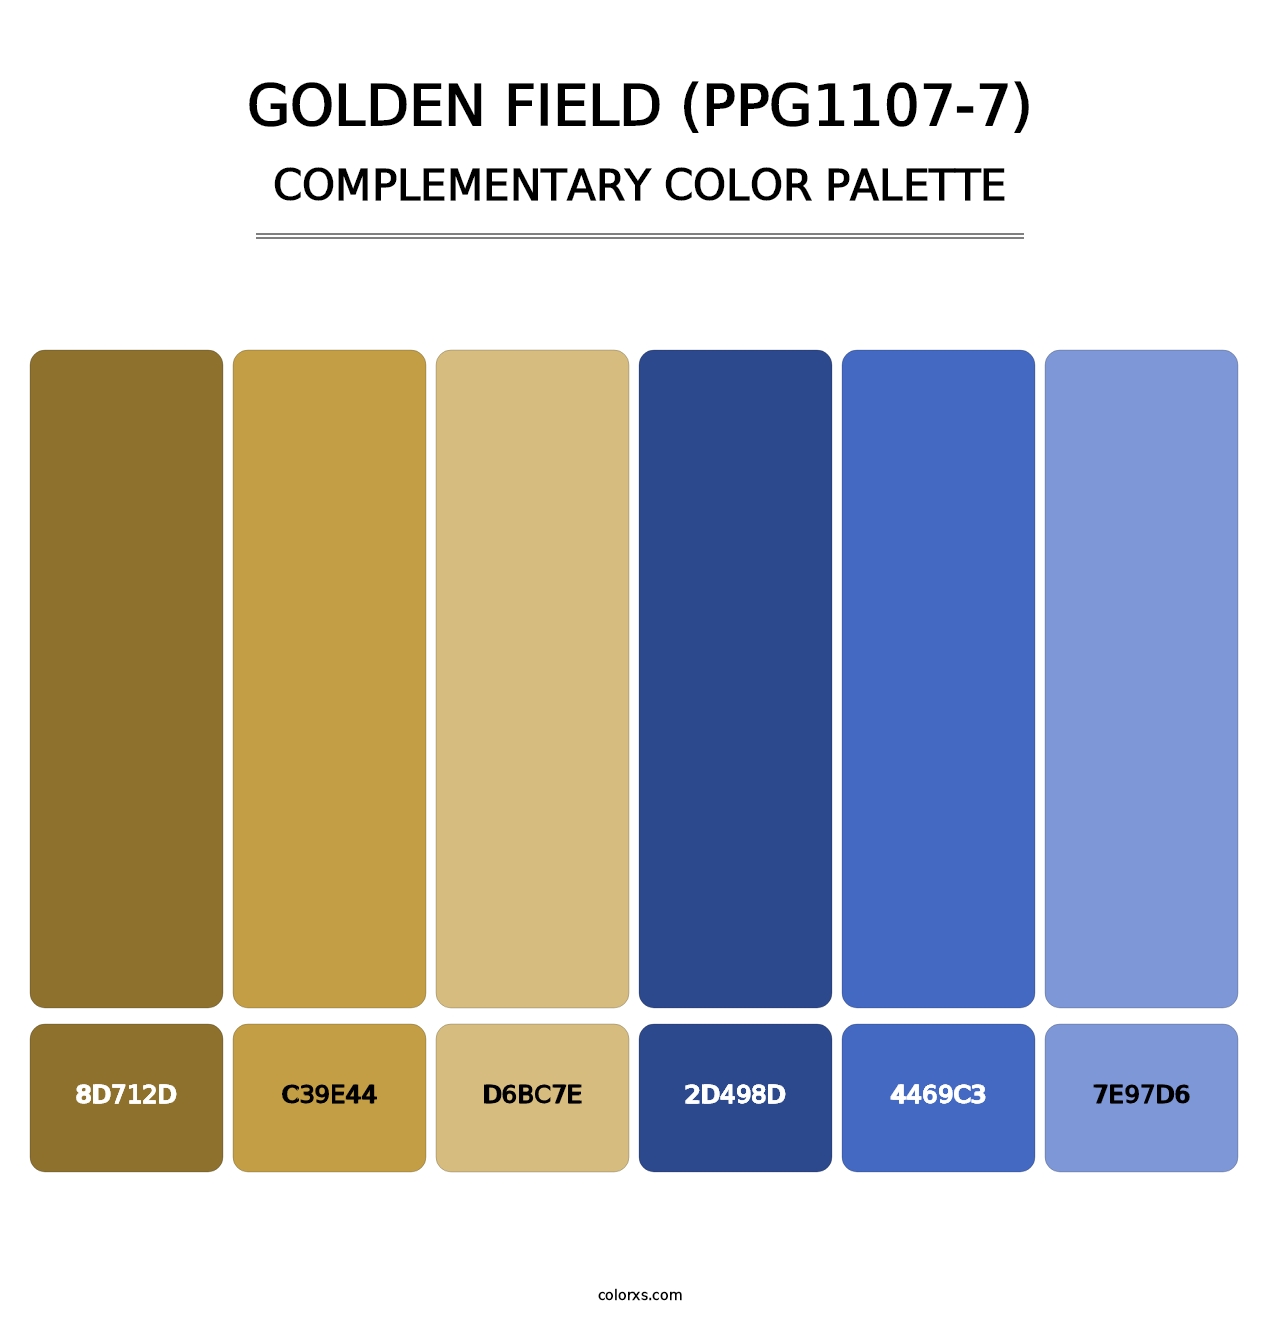 Golden Field (PPG1107-7) - Complementary Color Palette